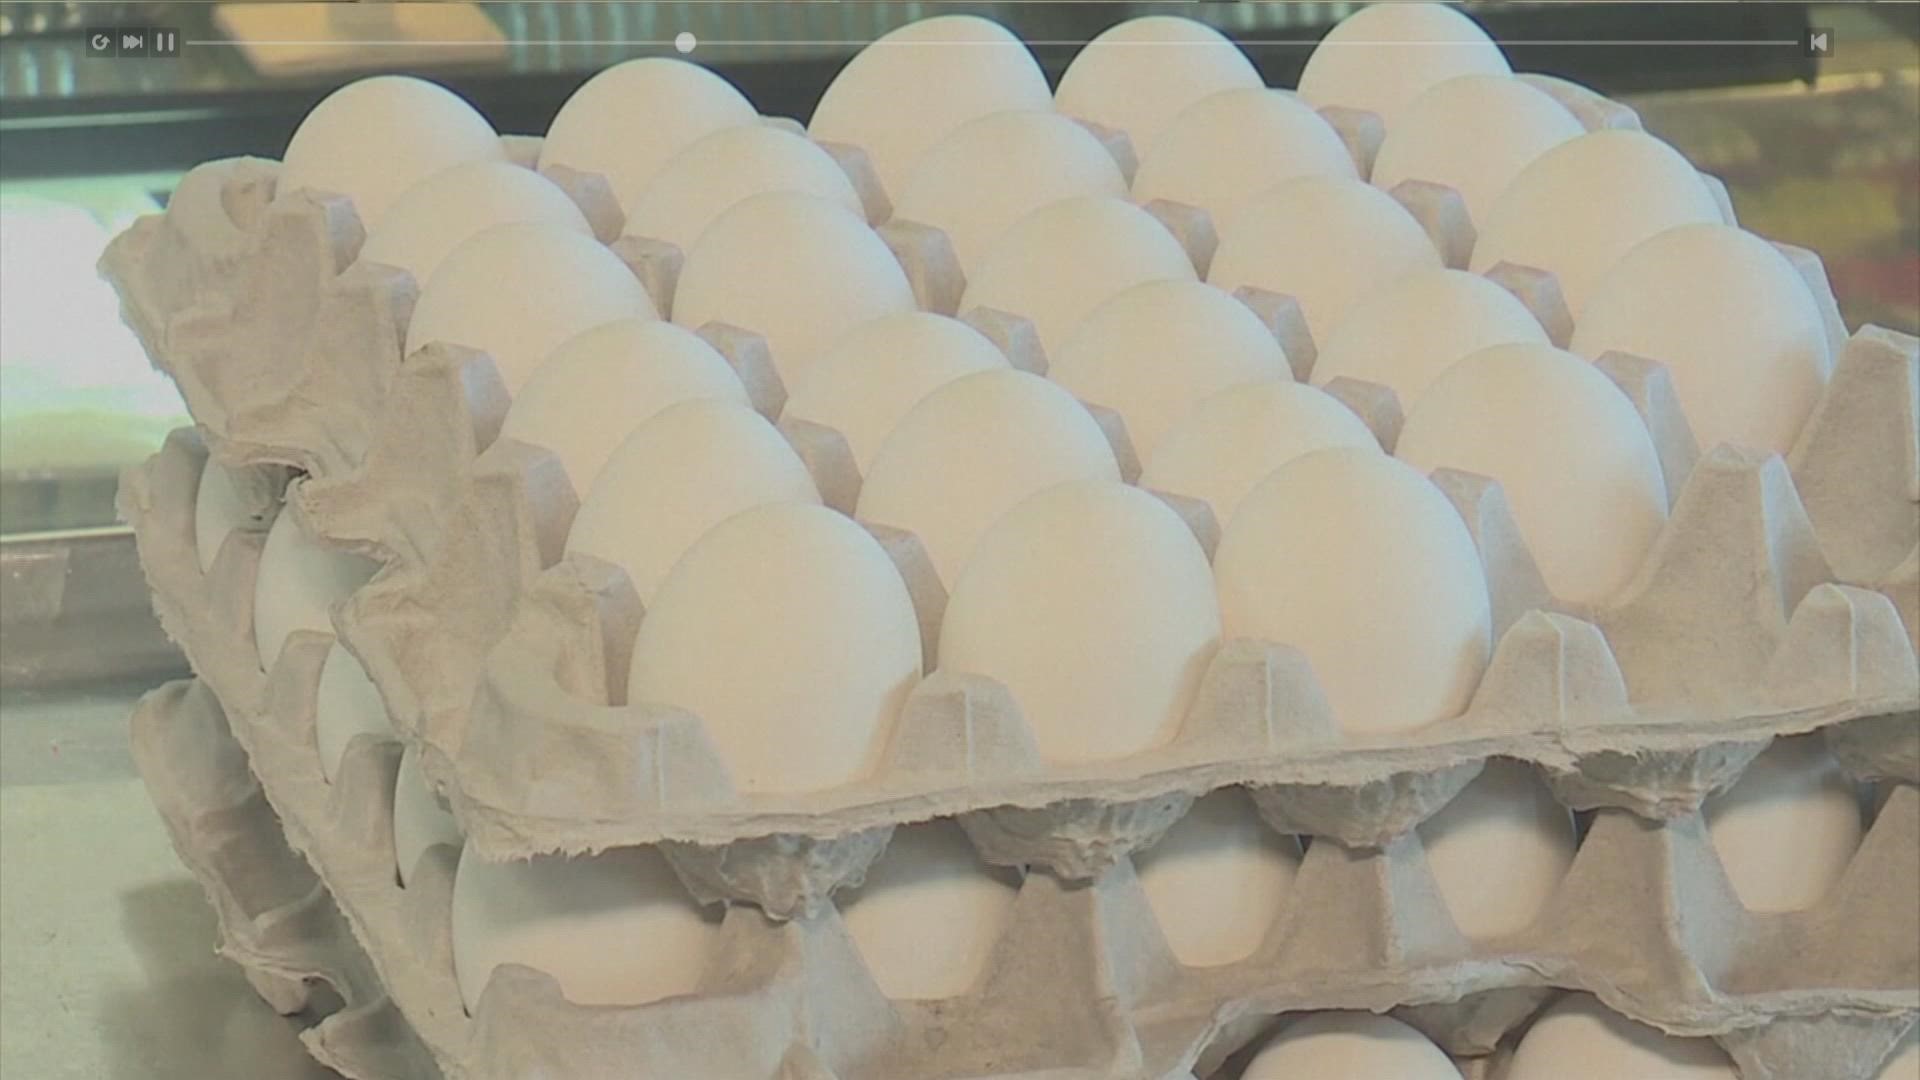 WFAA's Ariel Plasencia lists the reasons why egg prices have been skyrocketing lately.